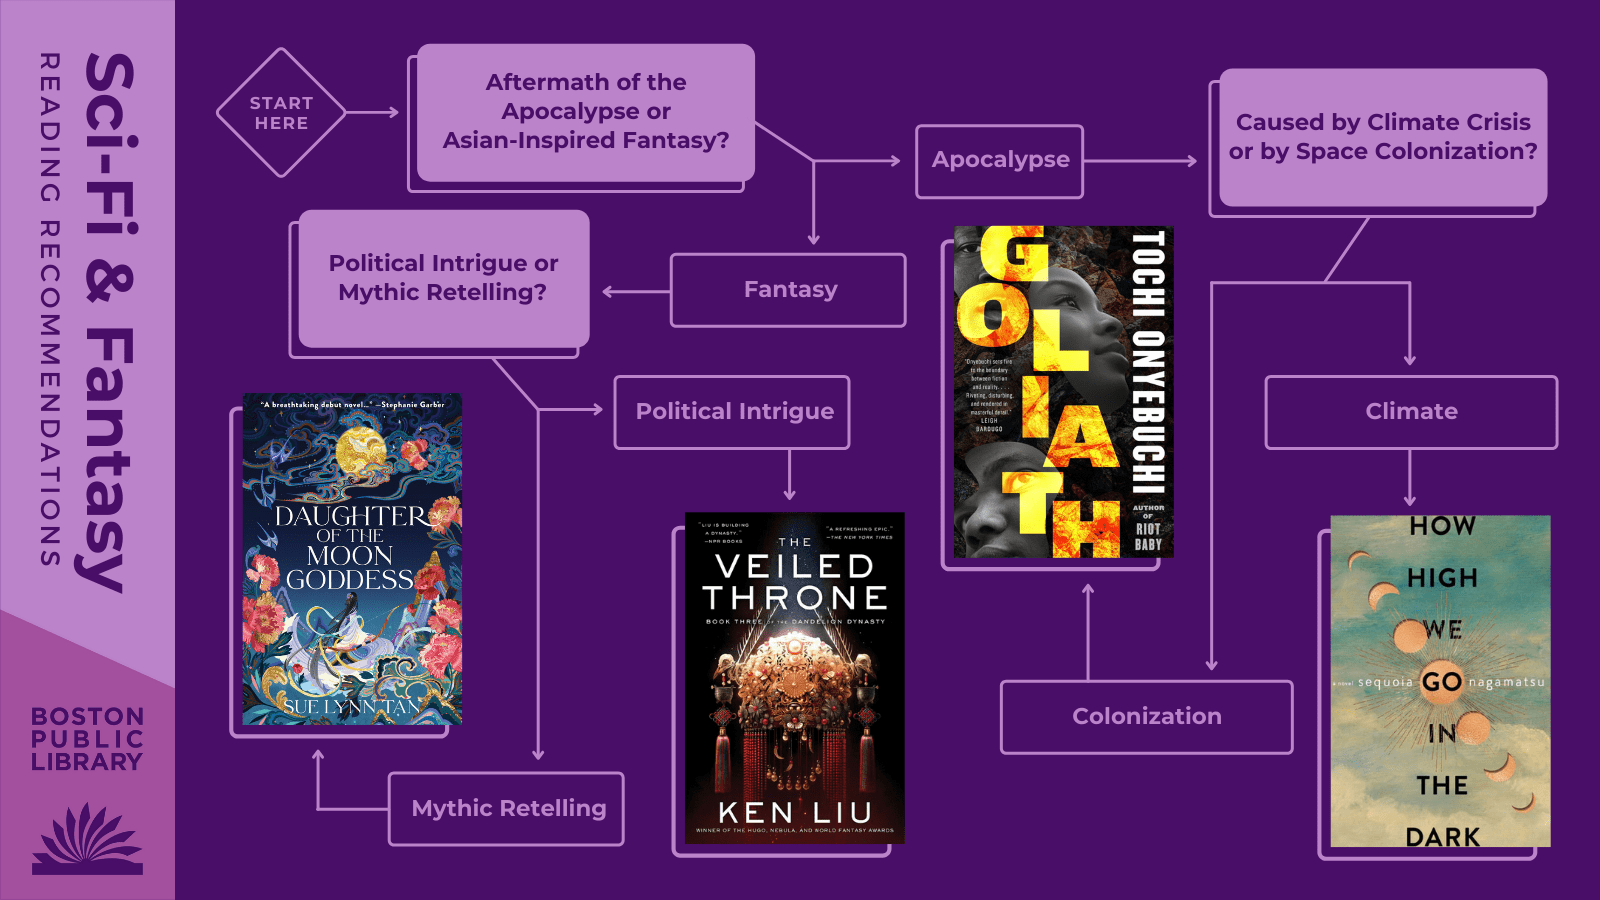 Q1: Aftermath of the Apocalypse or Asian-Inspired Fantasy? Apocalypse → Q2: Caused by Climate Crisis or by Space Colonization?Climate: How High We Go in the Dark by Sequoia Nagamatsu | Colonization: Goliath by Tochi Onyebuchi | Fantasy → Q3: Political Intrigue or Mythic Retelling? Political Intrigue: The Veiled Throne by Ken Liu | Mythic Retelling: Daughter of the Moon Goddess by Sue Lynn Tan.